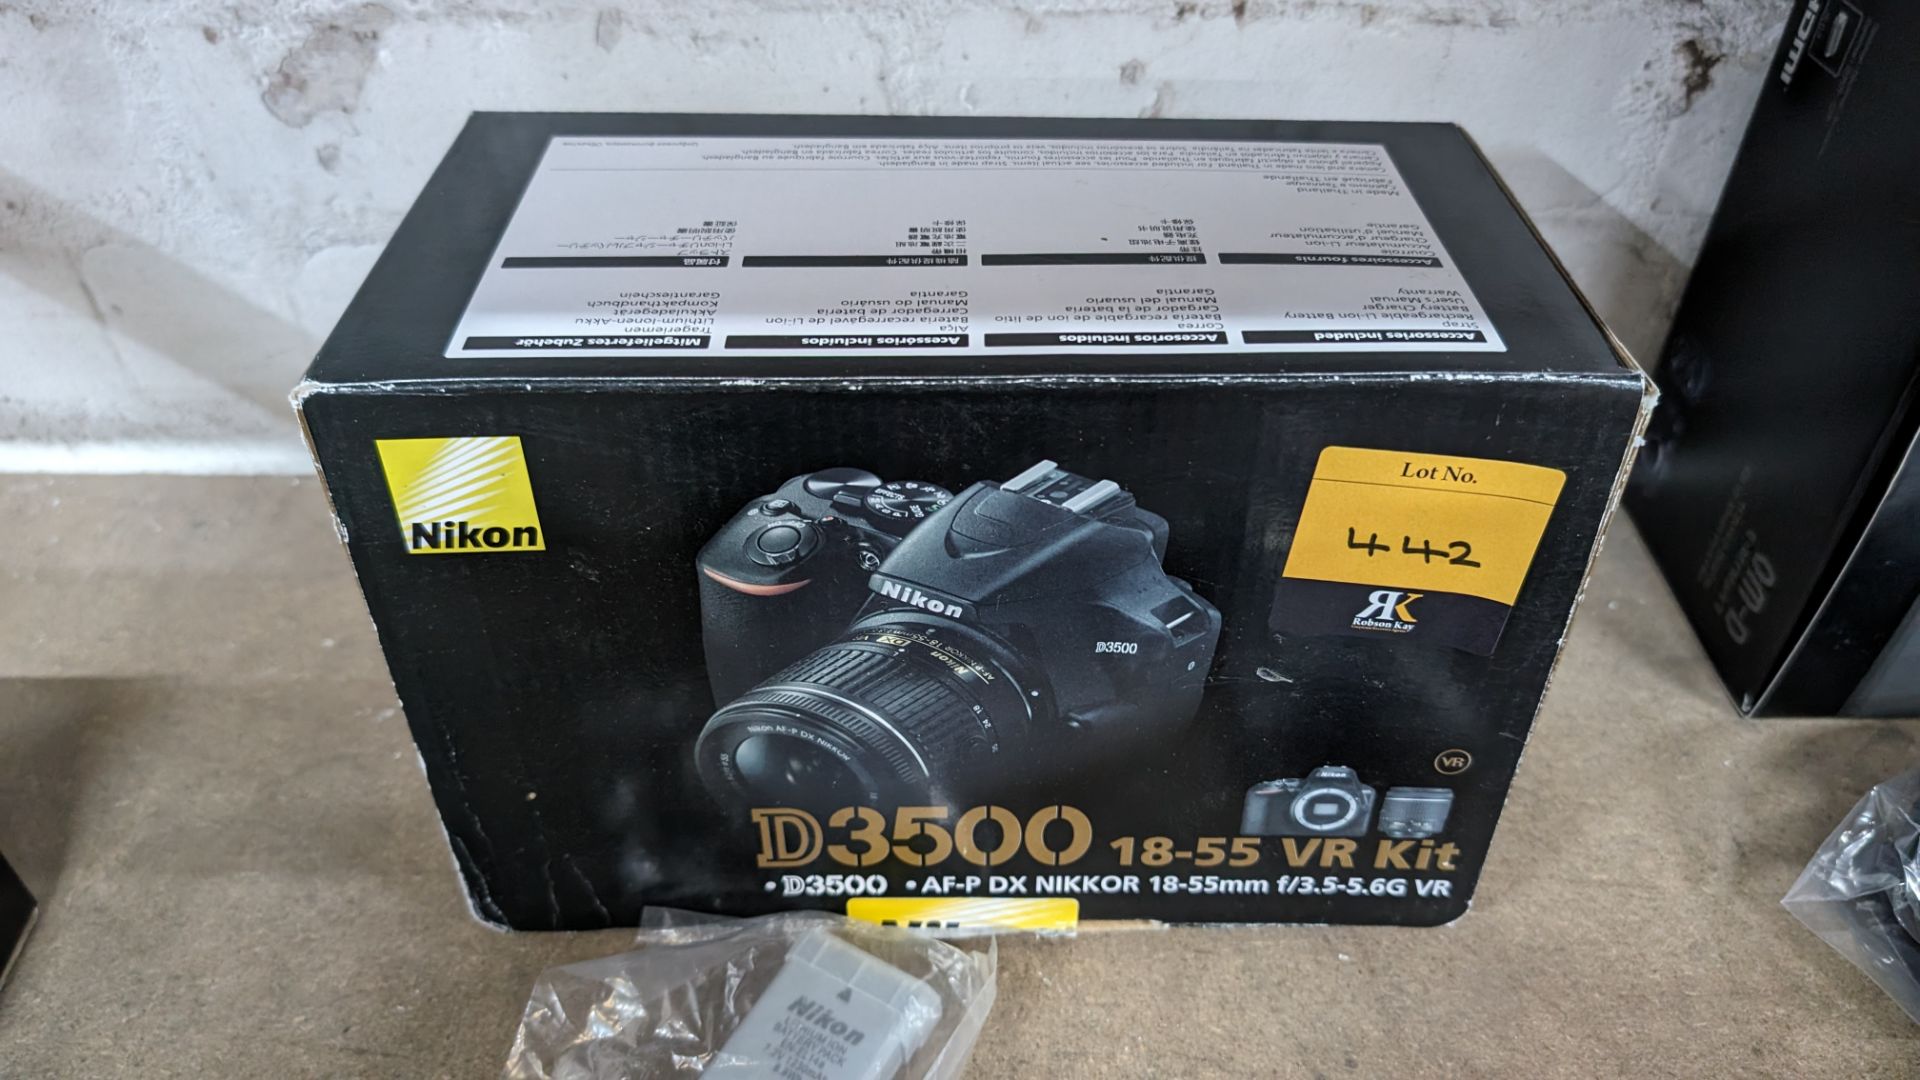 Nikon D3500 camera. Although this camera is in a box for a kit including a lens, this lot just comp - Image 5 of 8